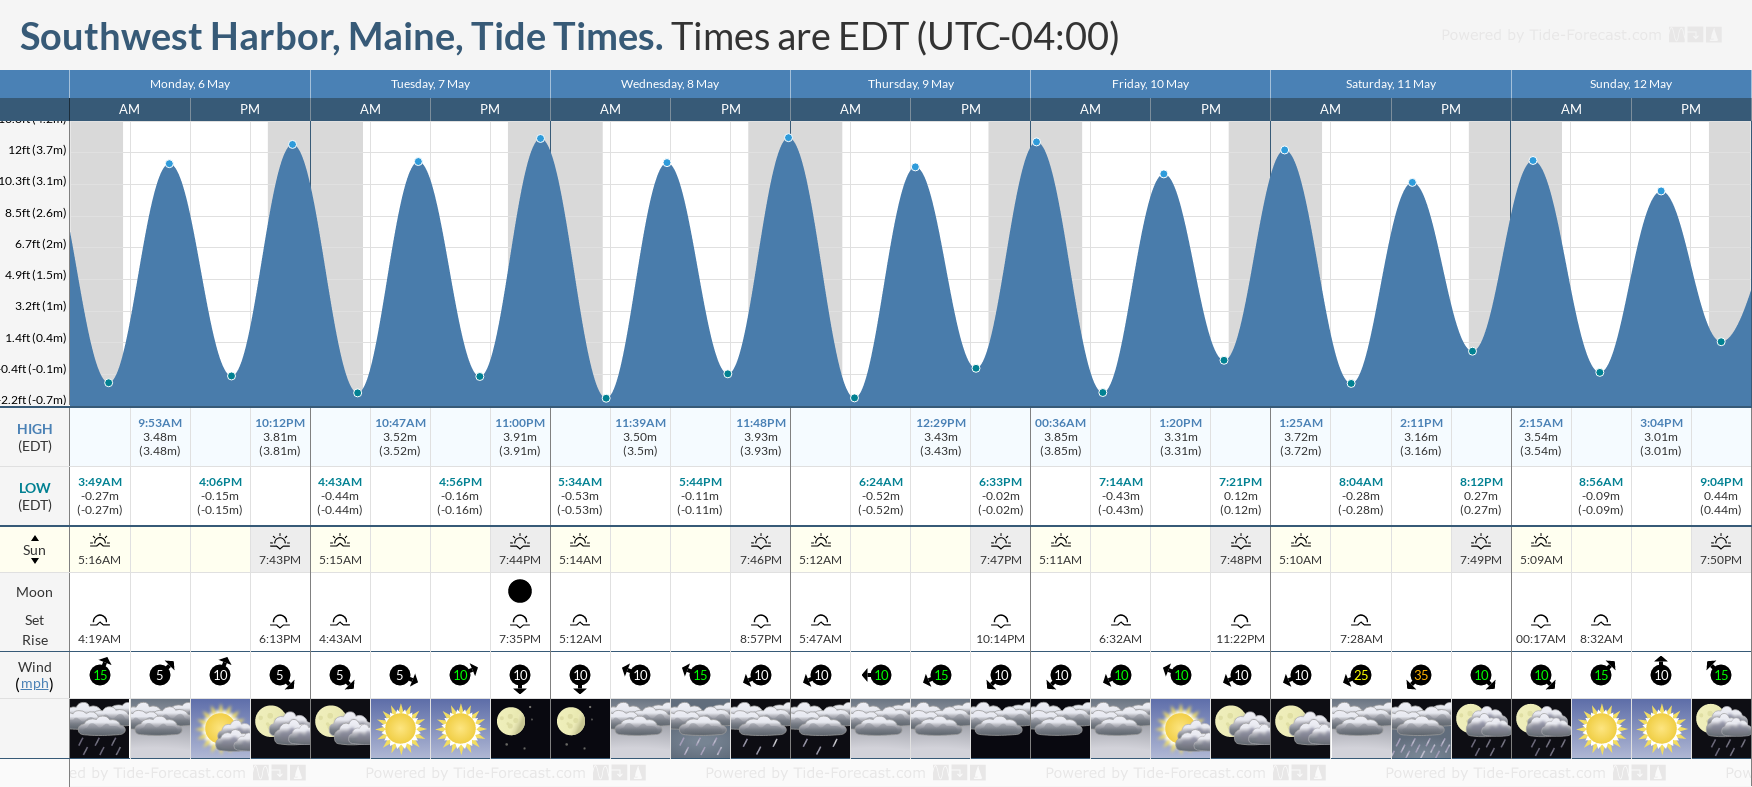 Southwest Harbor, Maine Tide Chart including high and low tide tide times for the next 7 days